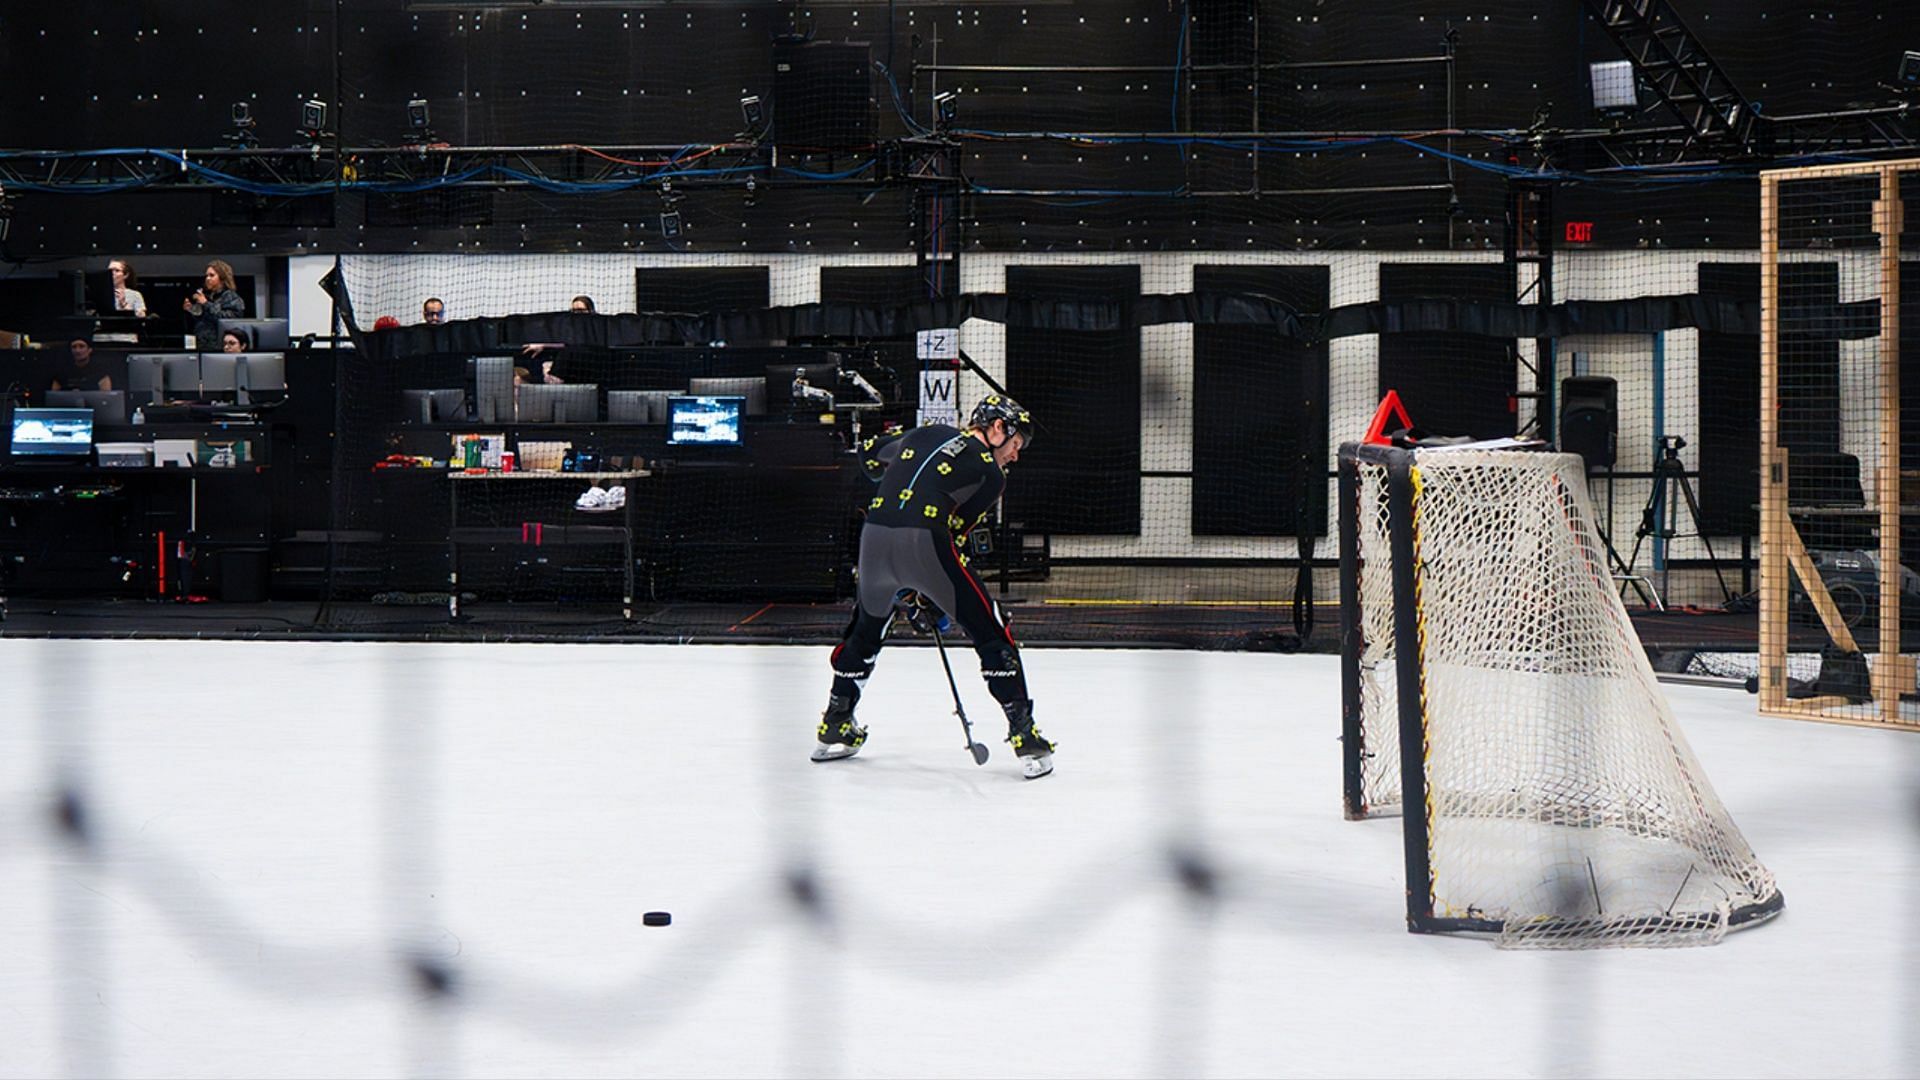 A snapshot from behind the scenes at NHL Community Day (Image via EA Sports)